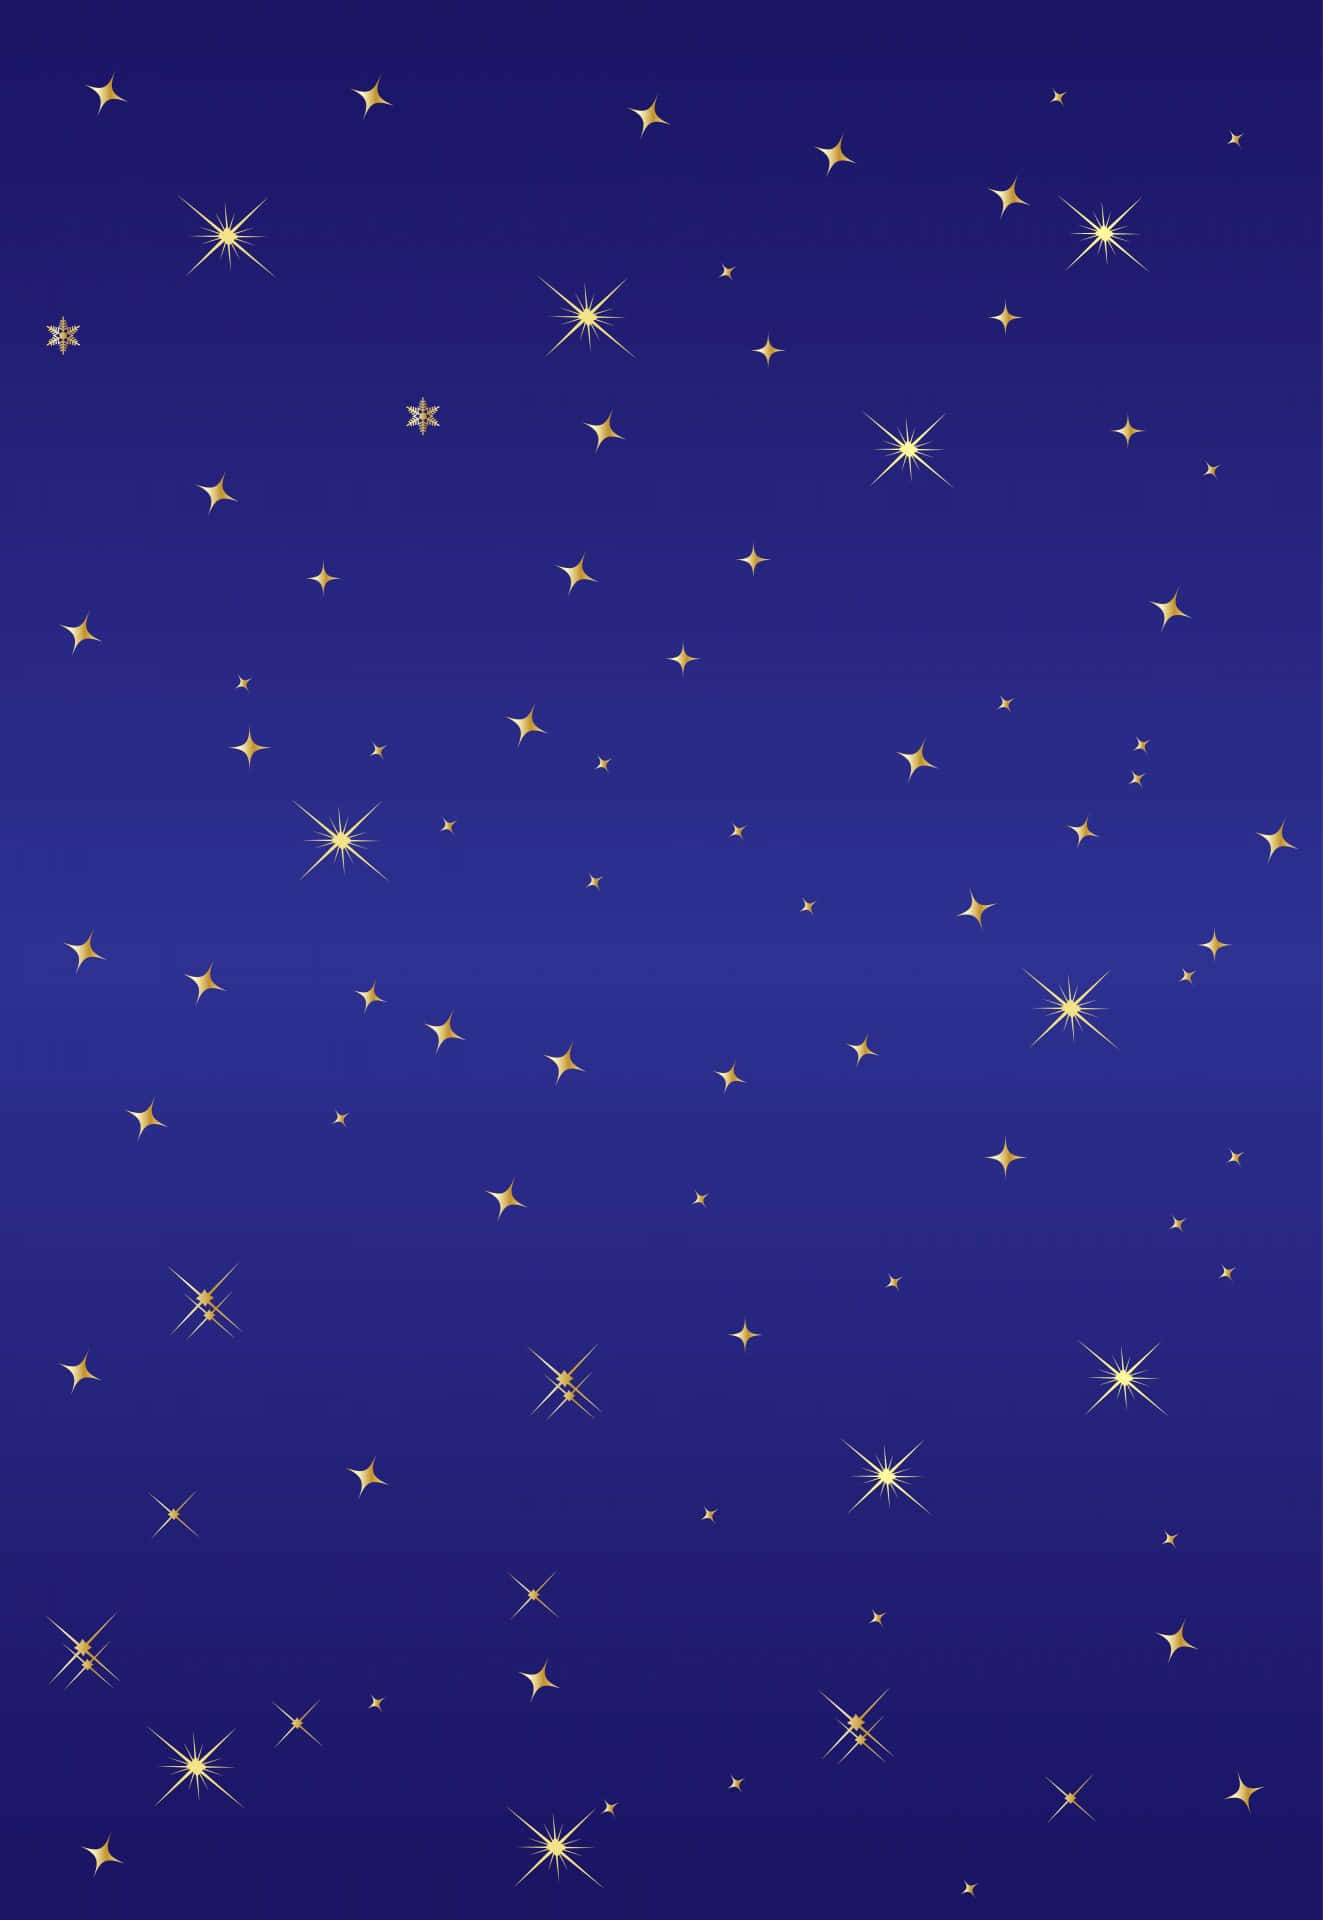 "Brighten Up Your Background with a Gold Star!"